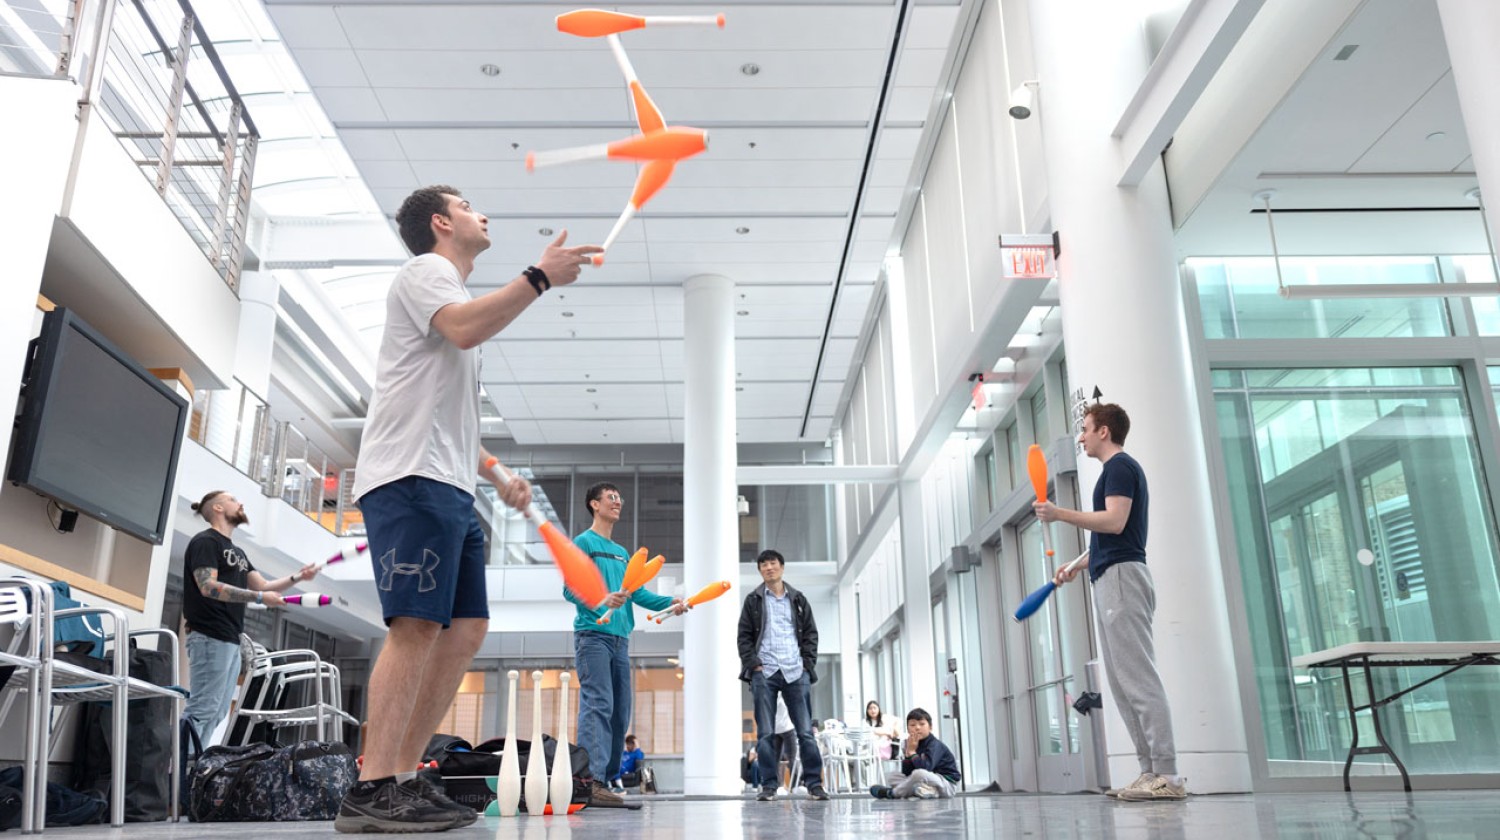 Cornell Juggling Club members practice with clubs during a weekly gathering in the Physical Sciences Building atrium. Jonah Botvinick-Greenhouse, second from left, and Bennett Santora ’26, far right, both have won elite juggling competitions.